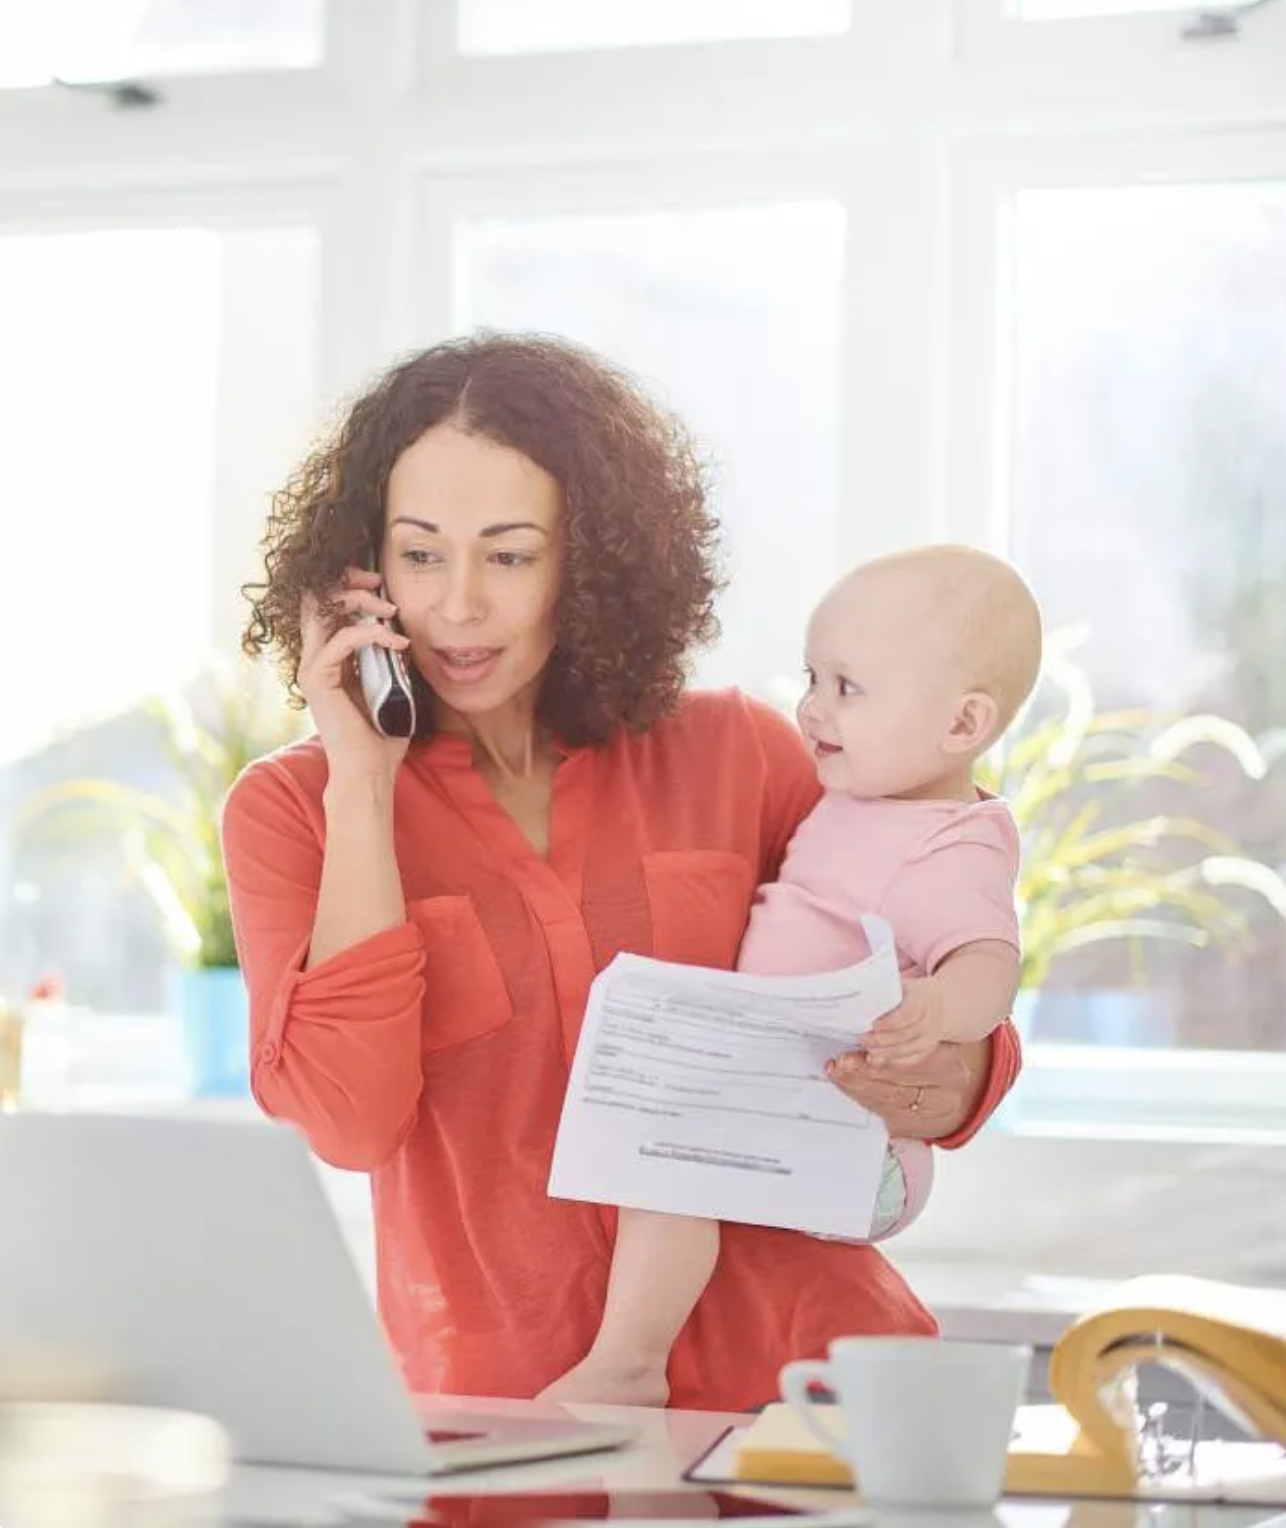 Mother holding a baby while she's looking at a daycare contract and talking on the phone.